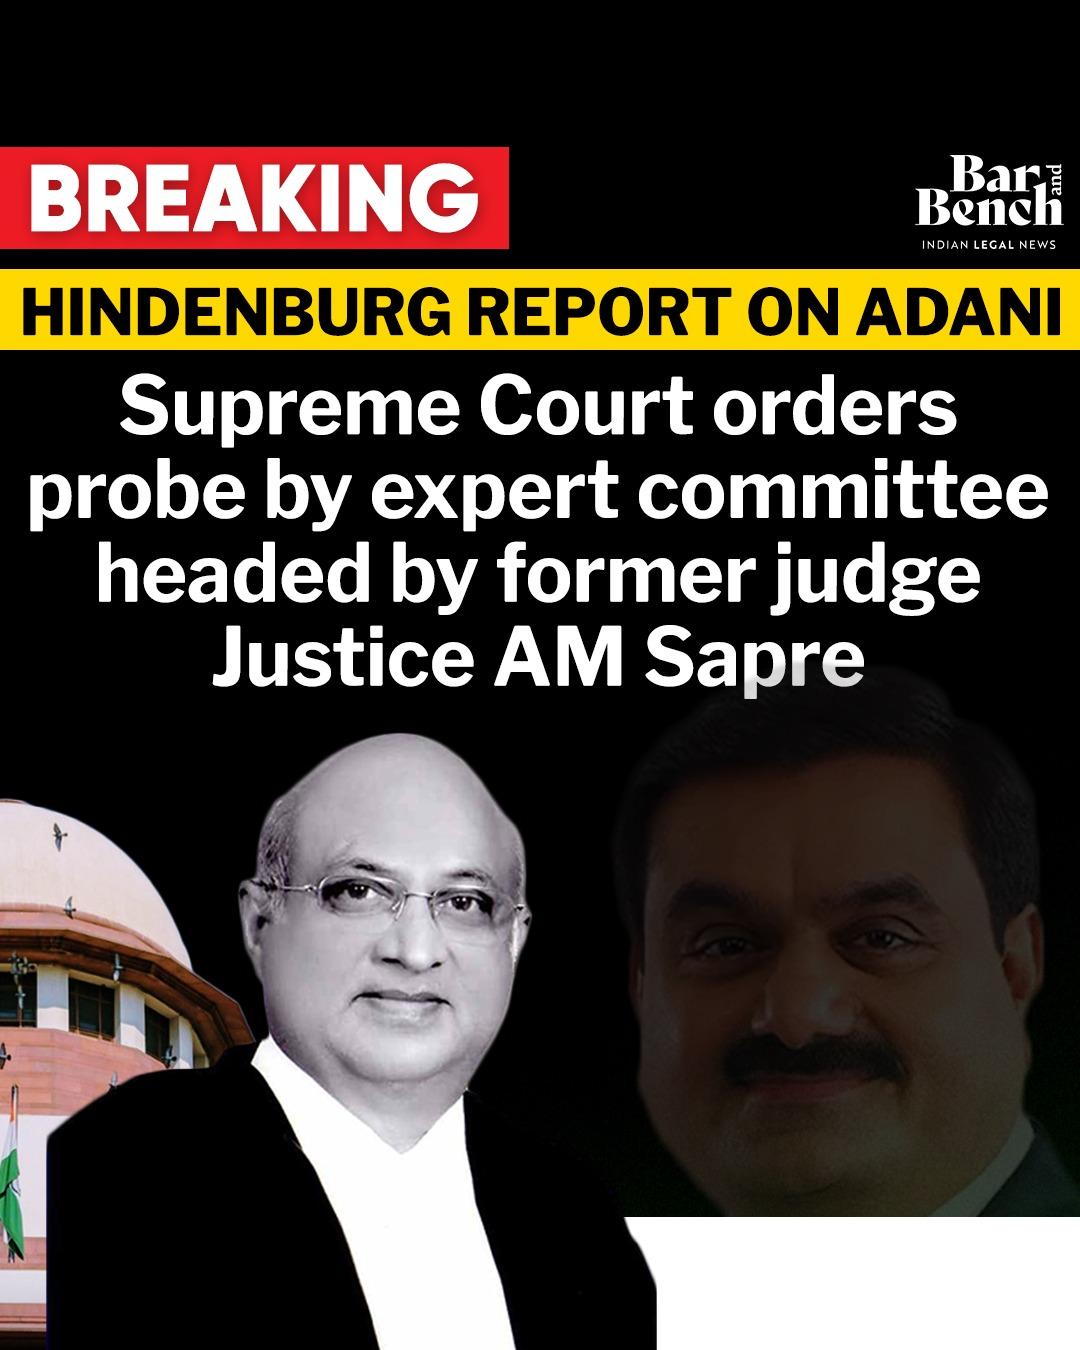 Bar & Bench on Twitter: "Retired Supreme Court judge Justice Abhay Manohar Sapre to head committee to examine Hindenburg -Adani issue #Adani #HindenburgReport #SupremeCourt Read full story: https://t.co/d7qfQ31Ds8 https://t.co/aQk4v7MWmr" / Twitter